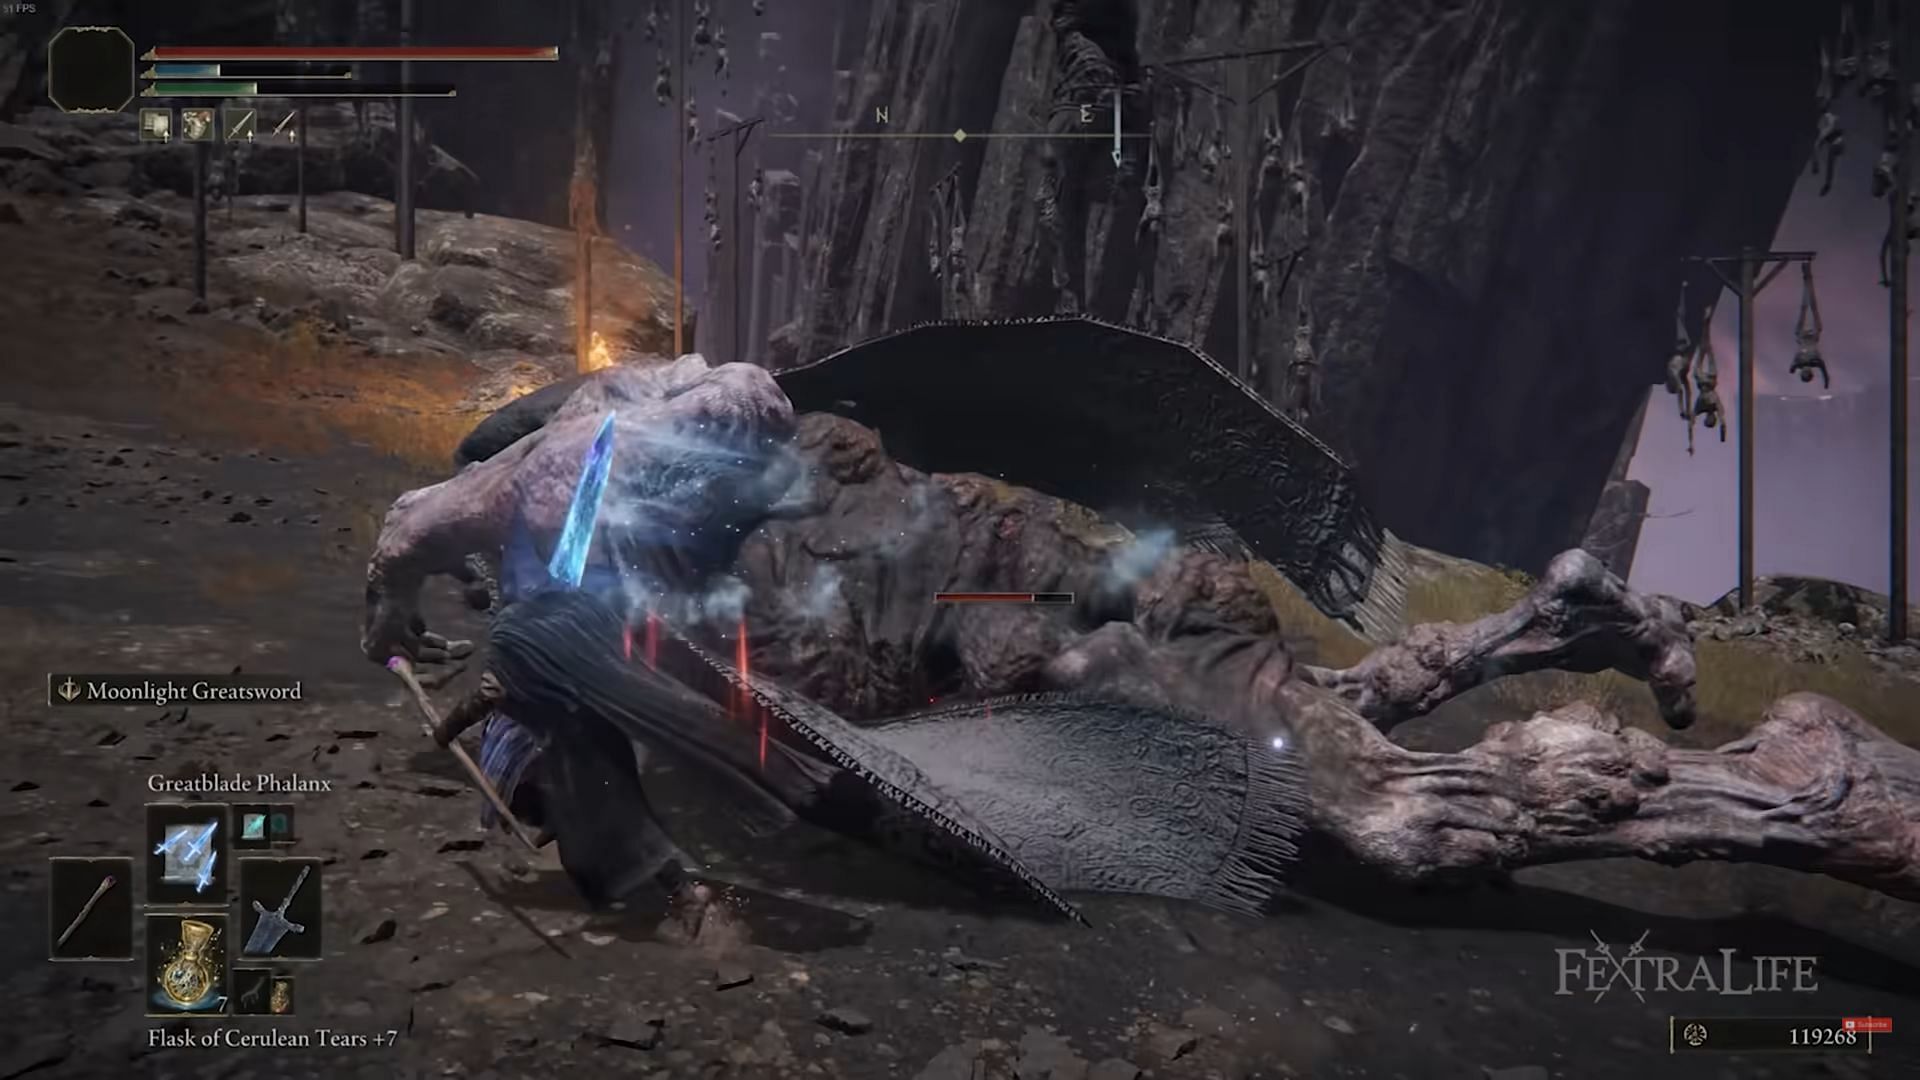 Dark Moon Greatsword is a bit slow, but the moonlight waves can deal a lot of damage (Image via Fextralife/YouTube)